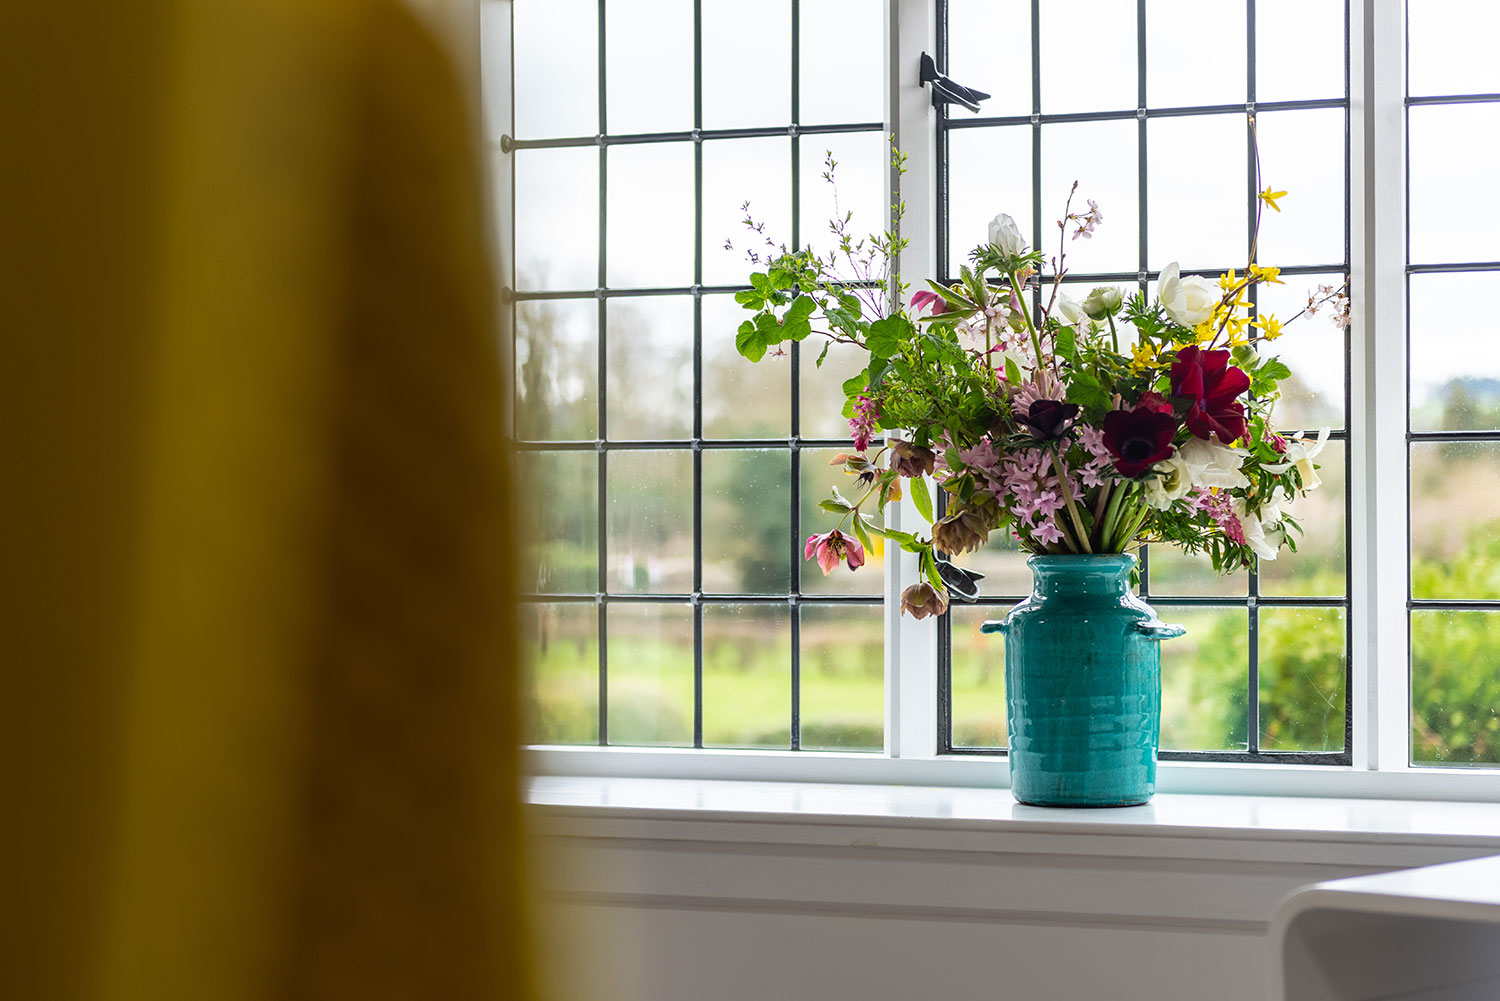 A vase of flowers on a window sill